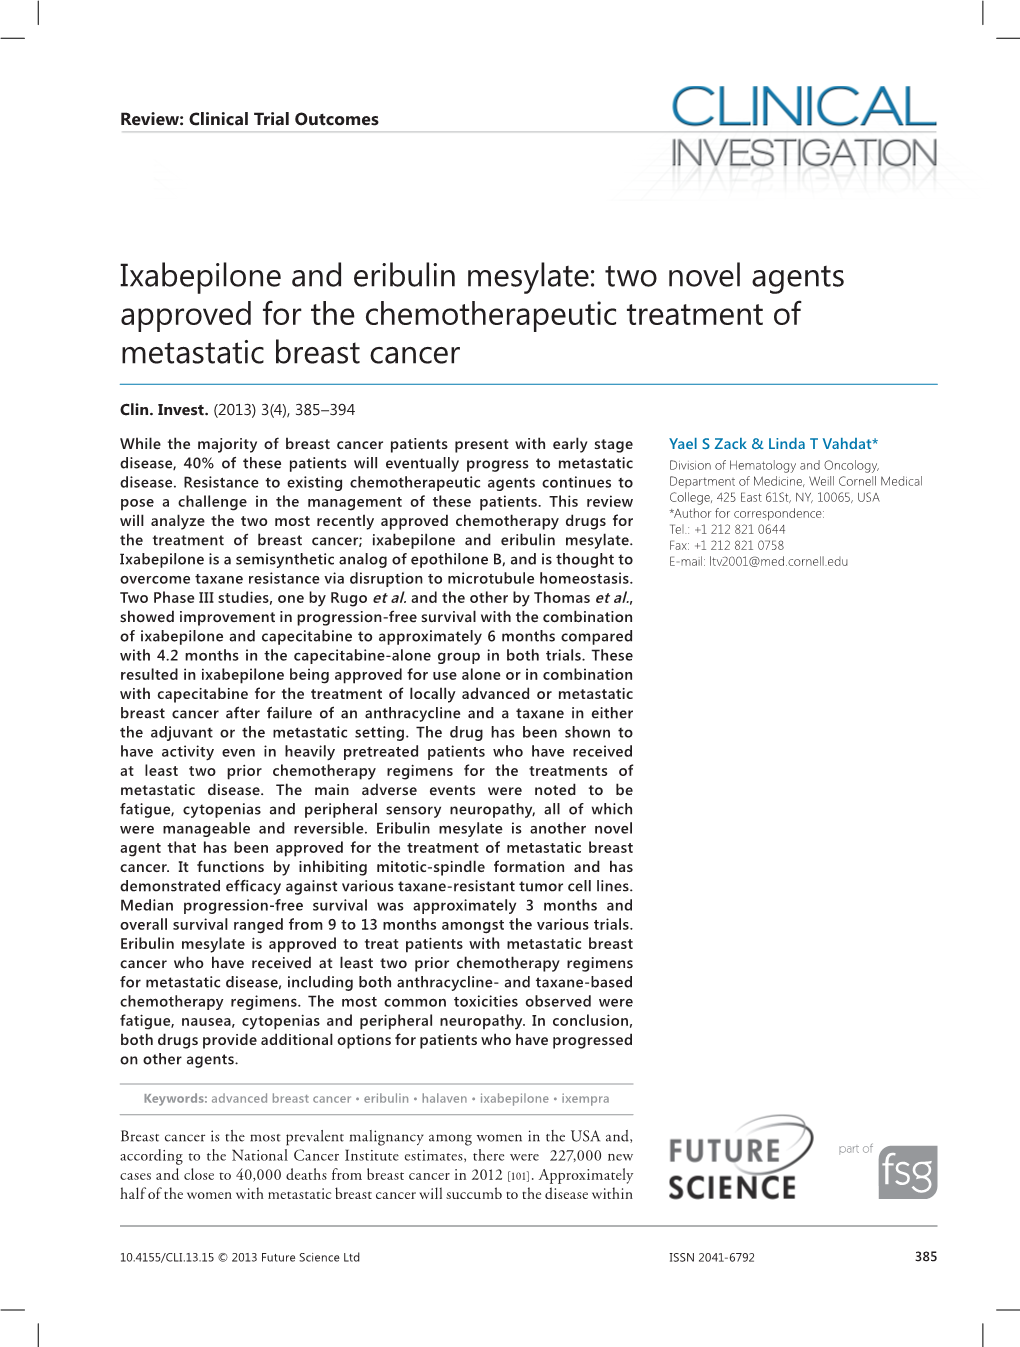 Ixabepilone and Eribulin Mesylate: Two Novel Agents Approved for the Chemotherapeutic Treatment of Metastatic Breast Cancer